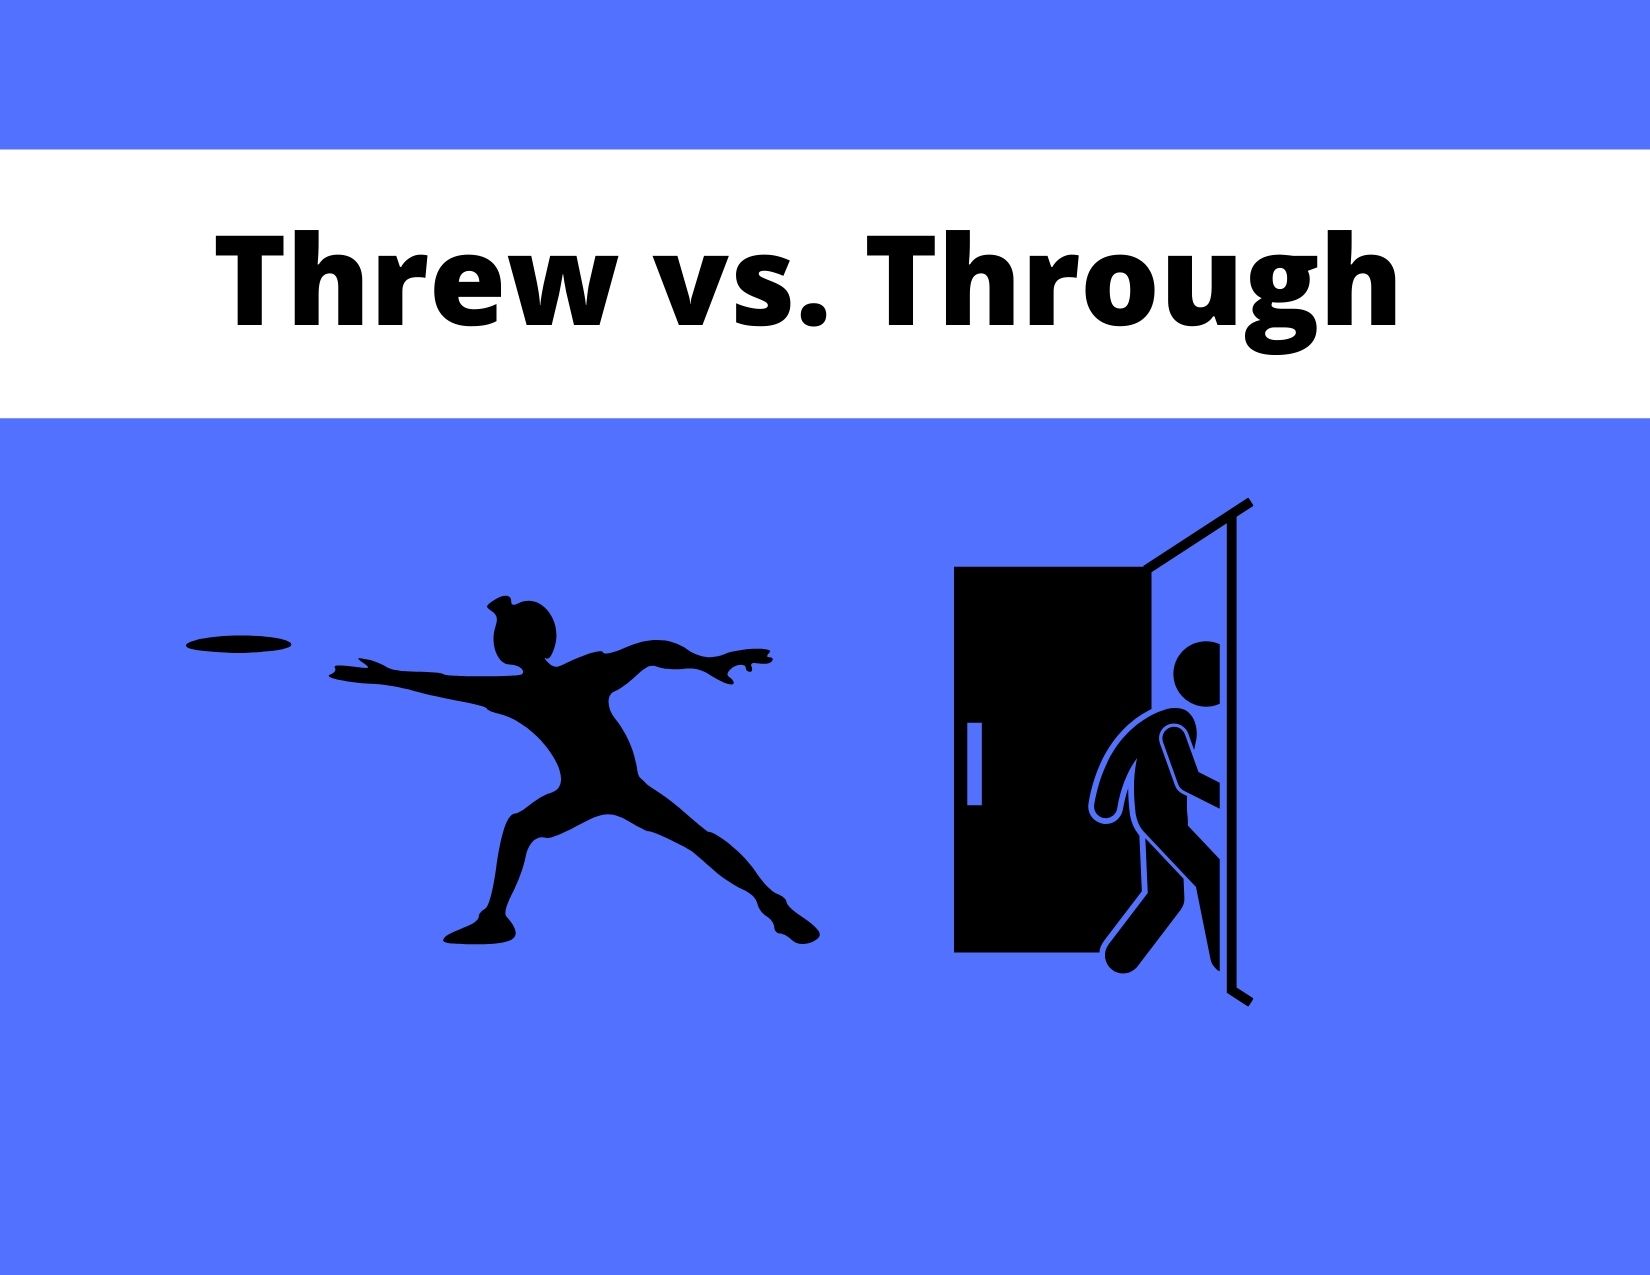 A graphic showing a man throwing a frisbee and a man walking through a door with the words "threw vs. through"